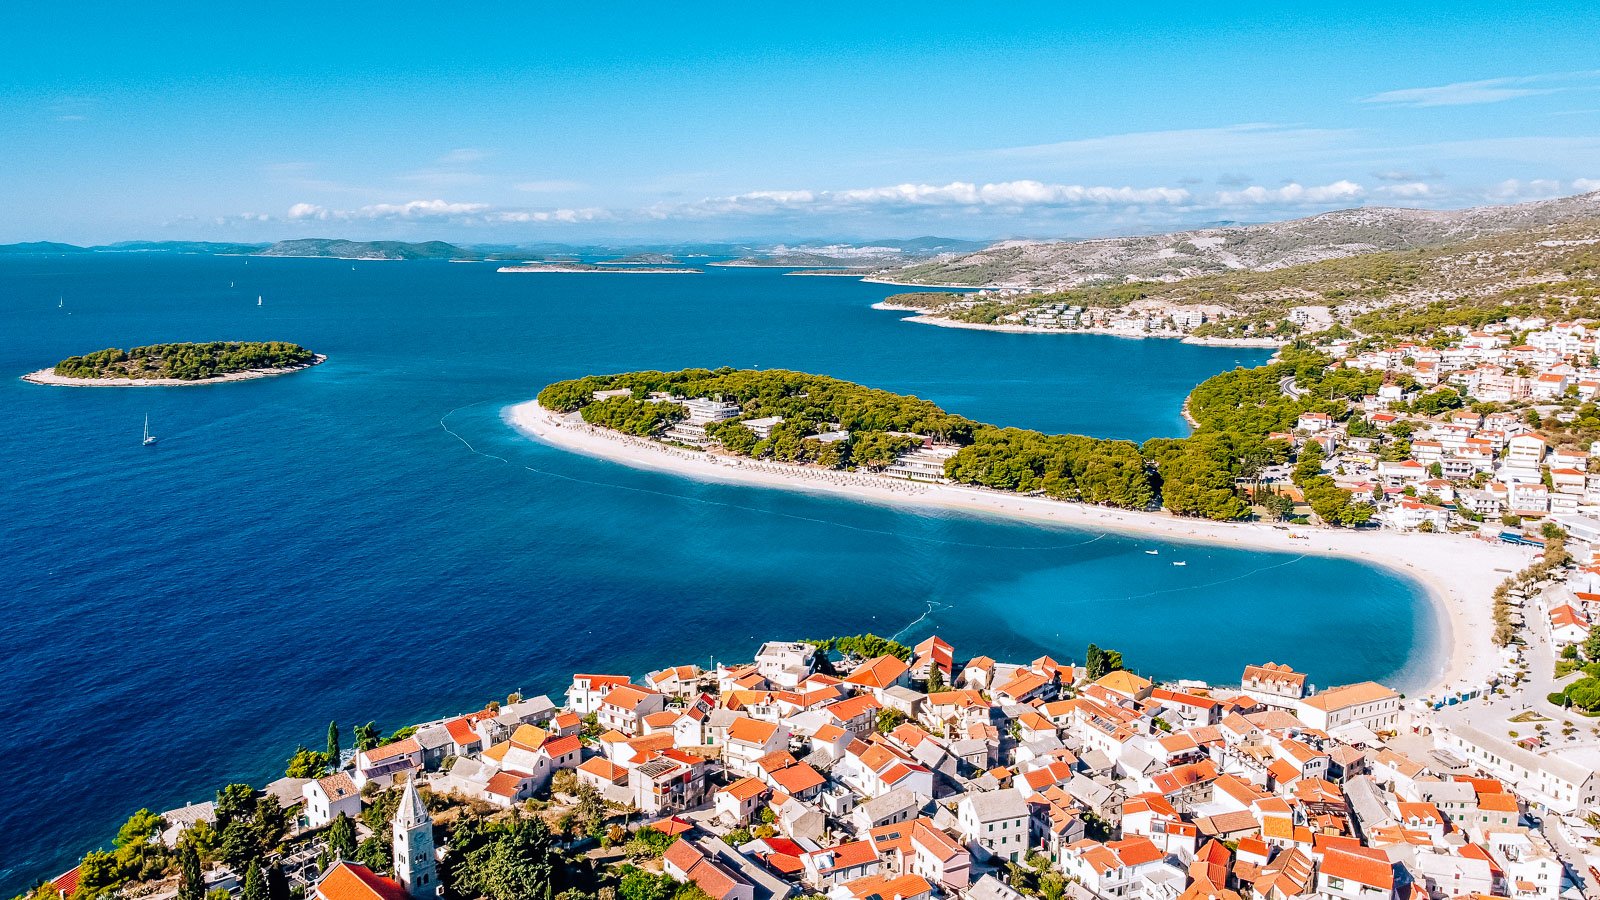 Drone shot looking along the adriatic coast in croatia, the sea below is bright blue with peninsulas of land sticking out into it covered in terracotta roof houses and green trees. Islands can be seen in the distance, it's sunny with blue sky